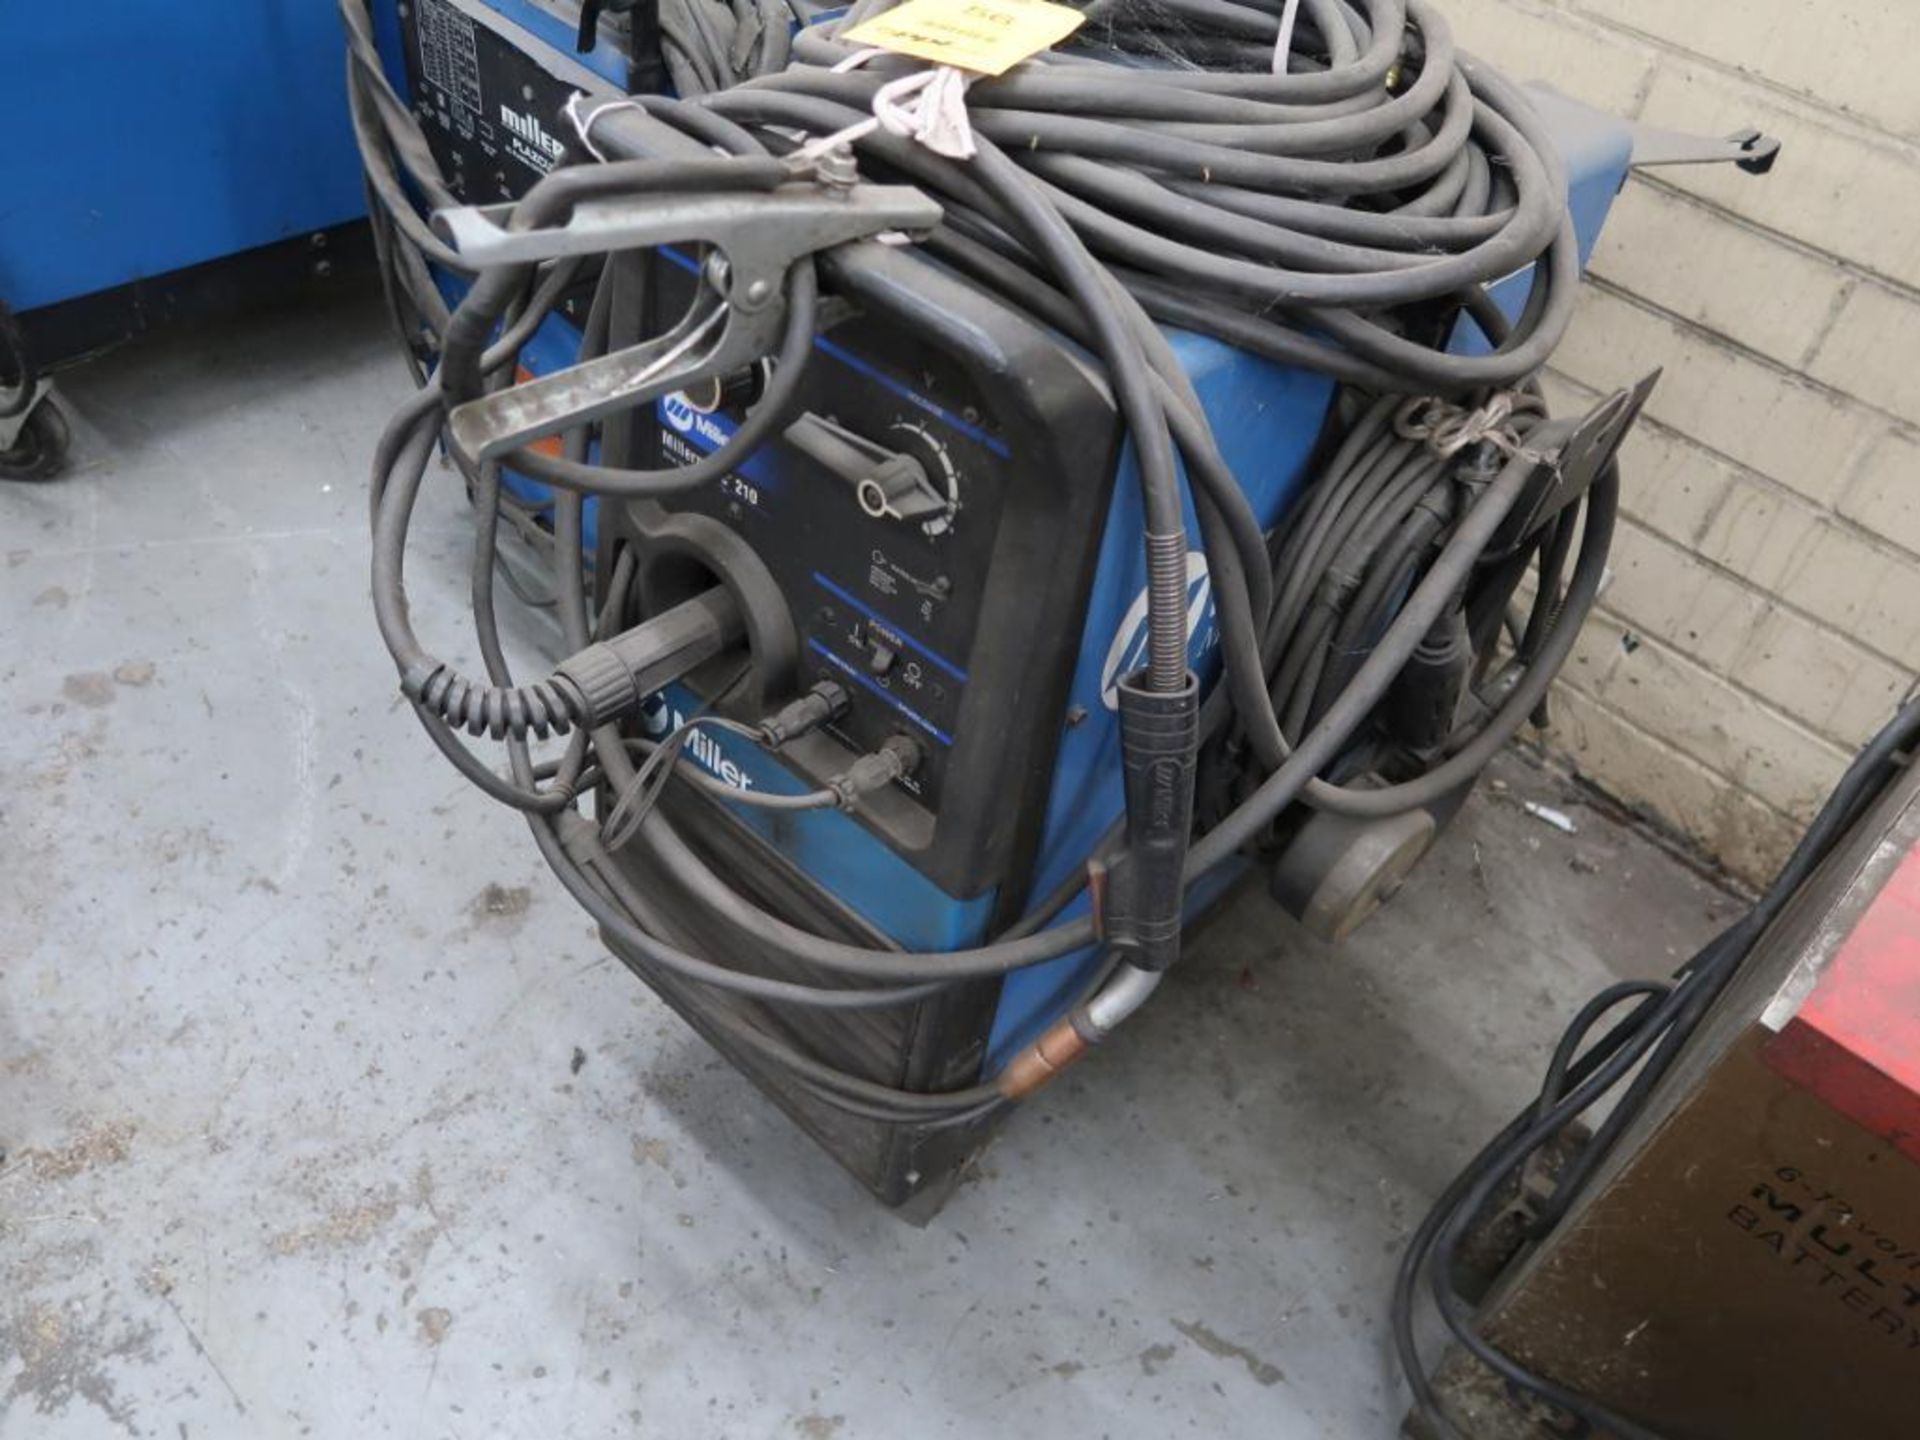 MILLER Portable MIG Welder Model Millermatic 210, with Leads & Spoolmatic Wire Feeder